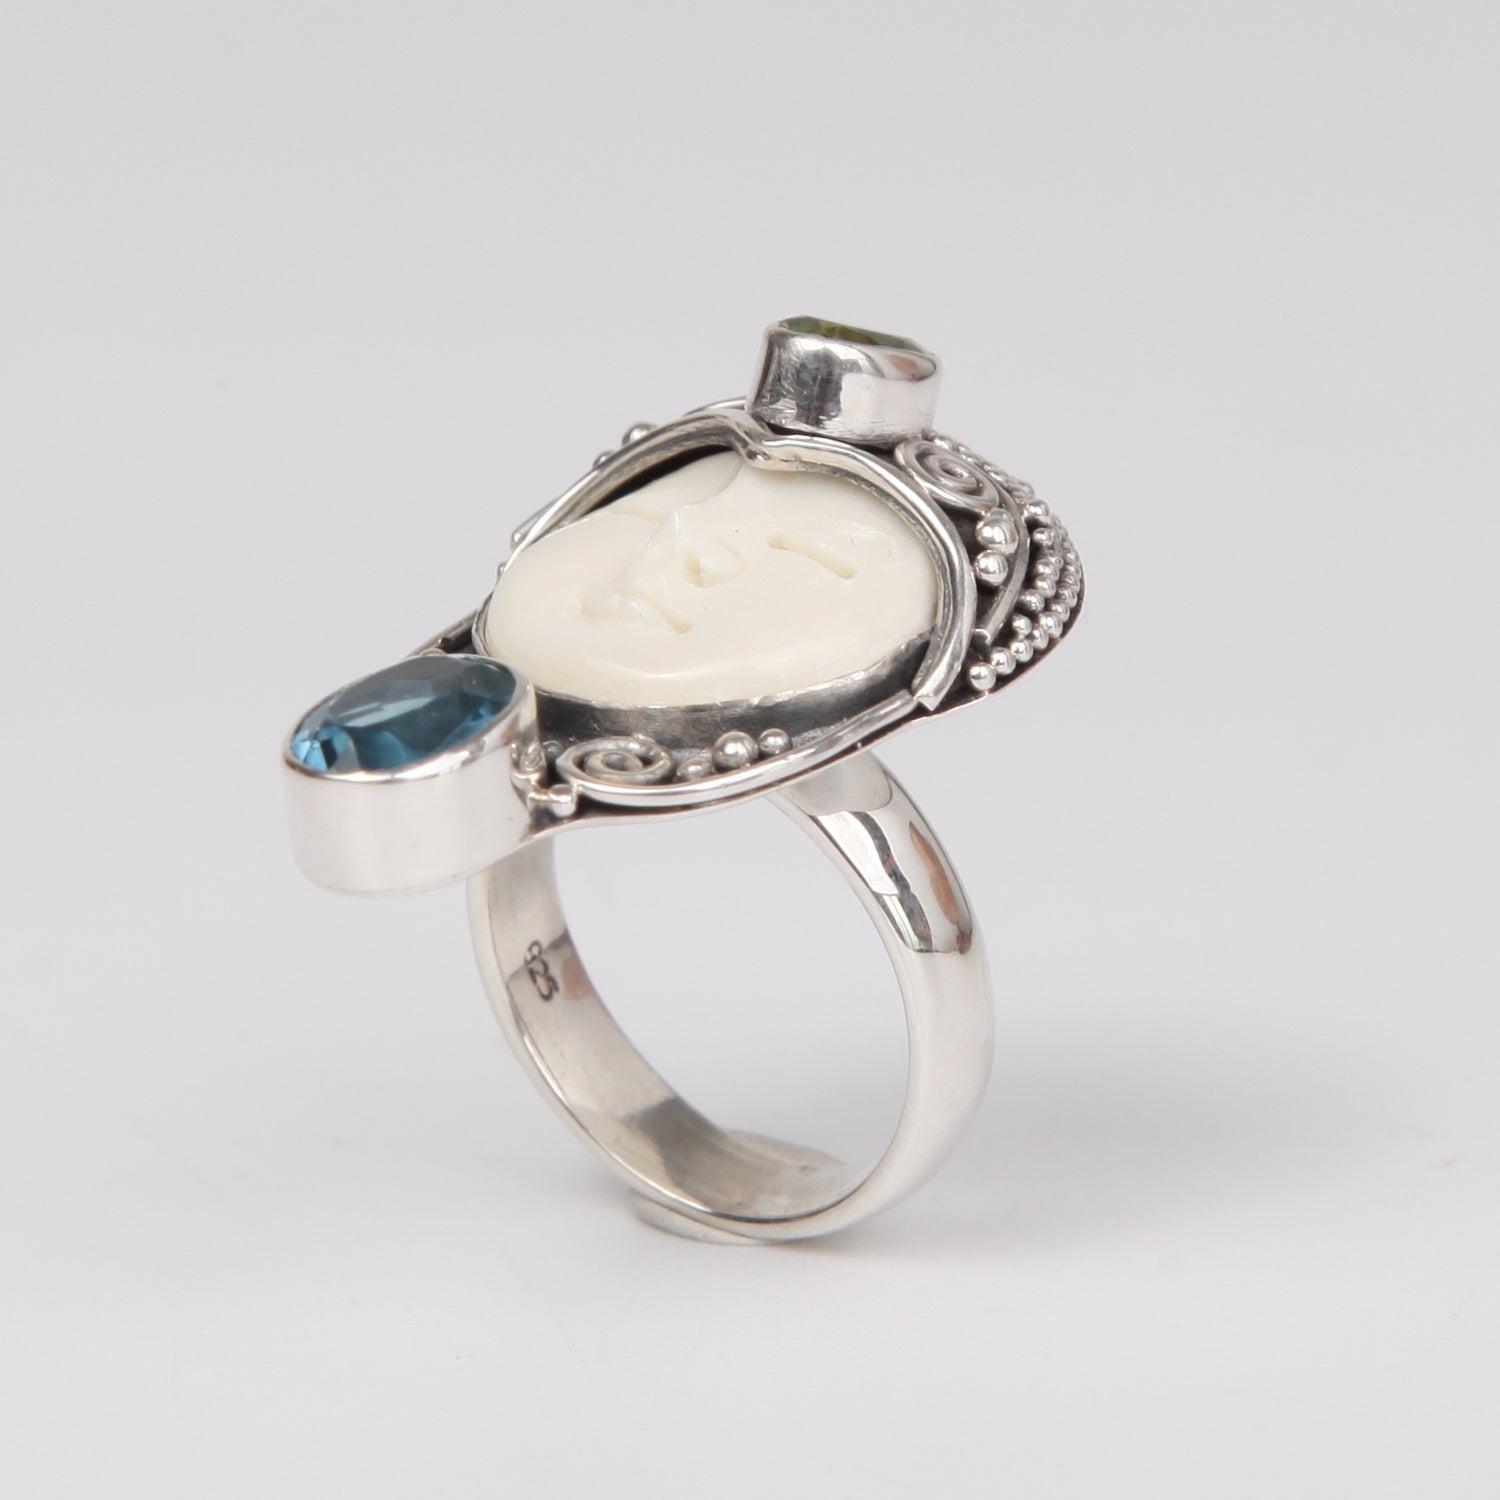 Buffalo Bone (Moon face) Sterling Silver Ring with Blue opaz and Peridot